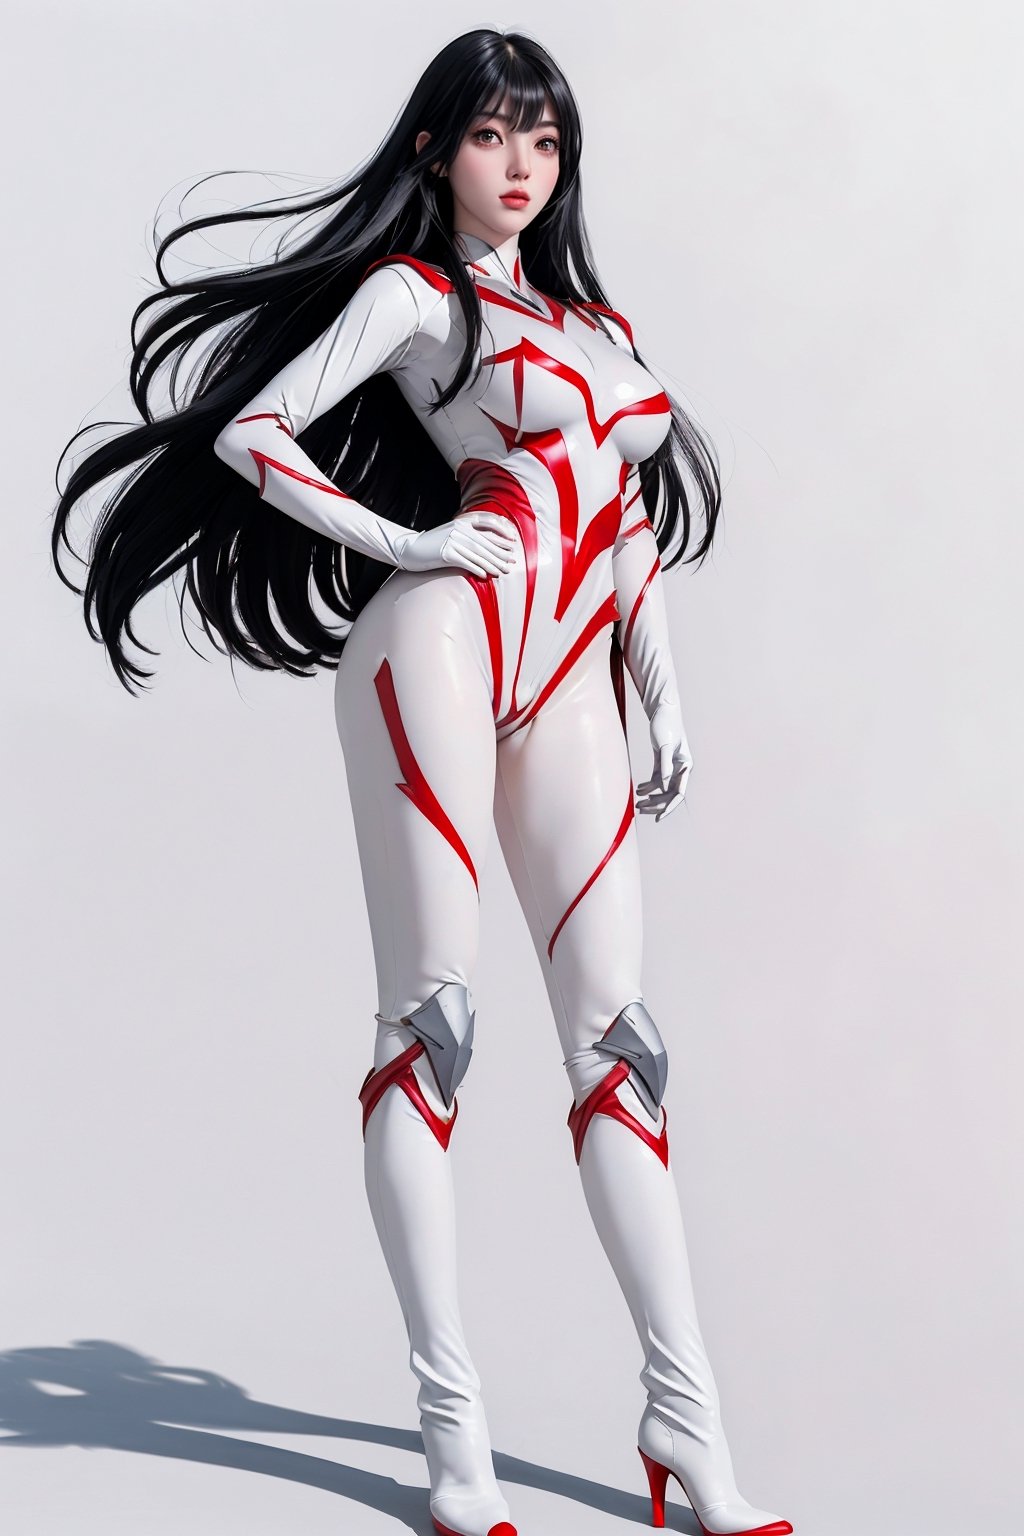 Ultrawoman, ultraman bodysuit, ultraman impact, long black straight hair, white over knee bootsMedium close, standing on the ground,empty handed, (Full whitebackground:1.3), Ultrawoman, Ultraman bodysuit, Ultraman impact, Ultragirl Miya, full body, Wearing red soles and white high heels, Chinese Girl Face, 18-year-old high school girl, Uniforms close to the body, full body, Battle posture, Very tall and strong, Clothes close to the body, White spire heels, Ultrawoman Shion, ultrawoman Ultrawoman, ultraman bodysuit, ultraman impact, long black straight hair, white over knee bootsMedium close, standing, stand at attention, empty handed, (Full whitebackground:1.3), Ultrawoman, Ultraman bodysuit, Ultraman impact, Ultragirl Miya, full body, Wearing red soles and white high heels, Chinese Girl Face, 18-year-old high school girl, Uniforms close to the body, full body, Battle posture, Very tall and strong, Clothes close to the body, White spire heels, Ultrawoman Shion, ultrawoman Ultrawoman, ultraman bodysuit, ultraman impact, long black straight hair, white over knee bootsMedium close, standing, stand at attention, empty handed, (Full whitebackground:1.3), Ultrawoman, Ultraman bodysuit, Ultraman impact, Ultragirl Miya, full body, Wearing red soles and white high heels, Chinese Girl Face, 18-year-old high school girl, Uniforms close to the body, full body, Battle posture, Very tall and strong, Clothes close to the body, White spire heels, Ultrawoman Shion, ultrawoman Ultrawoman, ultraman bodysuit, ultraman impact, long black straight hair, white over knee bootsMedium close, standing, stand at attention, empty handed, (Full whitebackground:1.3), Ultrawoman, Ultraman bodysuit, Ultraman impact, Ultragirl Miya, full body, Wearing red soles and white high heels, Chinese Girl Face, 18-year-old high school girl, Uniforms close to the body, full body, Battle posture, Very tall and strong, Clothes close to the body, White spire heels, Ultrawoman Shion, ultrawoman S close to the body, White spire heels, Ultrawoman Shion, ultrawoman Slightly sideways, young beauty spirit,Full body,Battle posture,cs001,See the whole body,Slightly sideways,plump figure